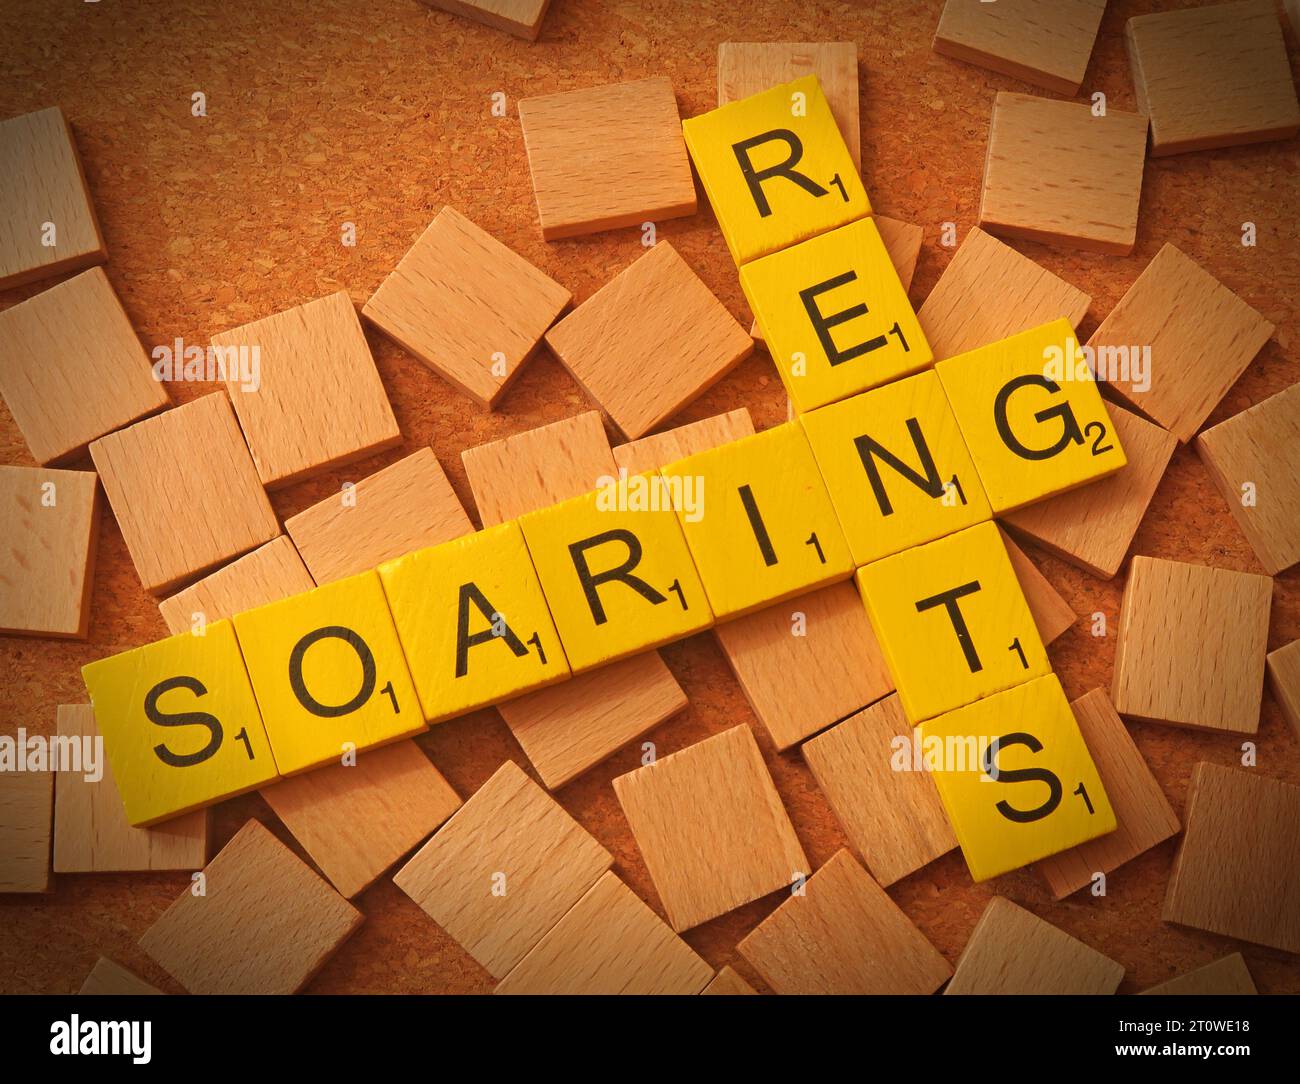 Soaring Rents spelled out in Scrabble letters Stock Photo